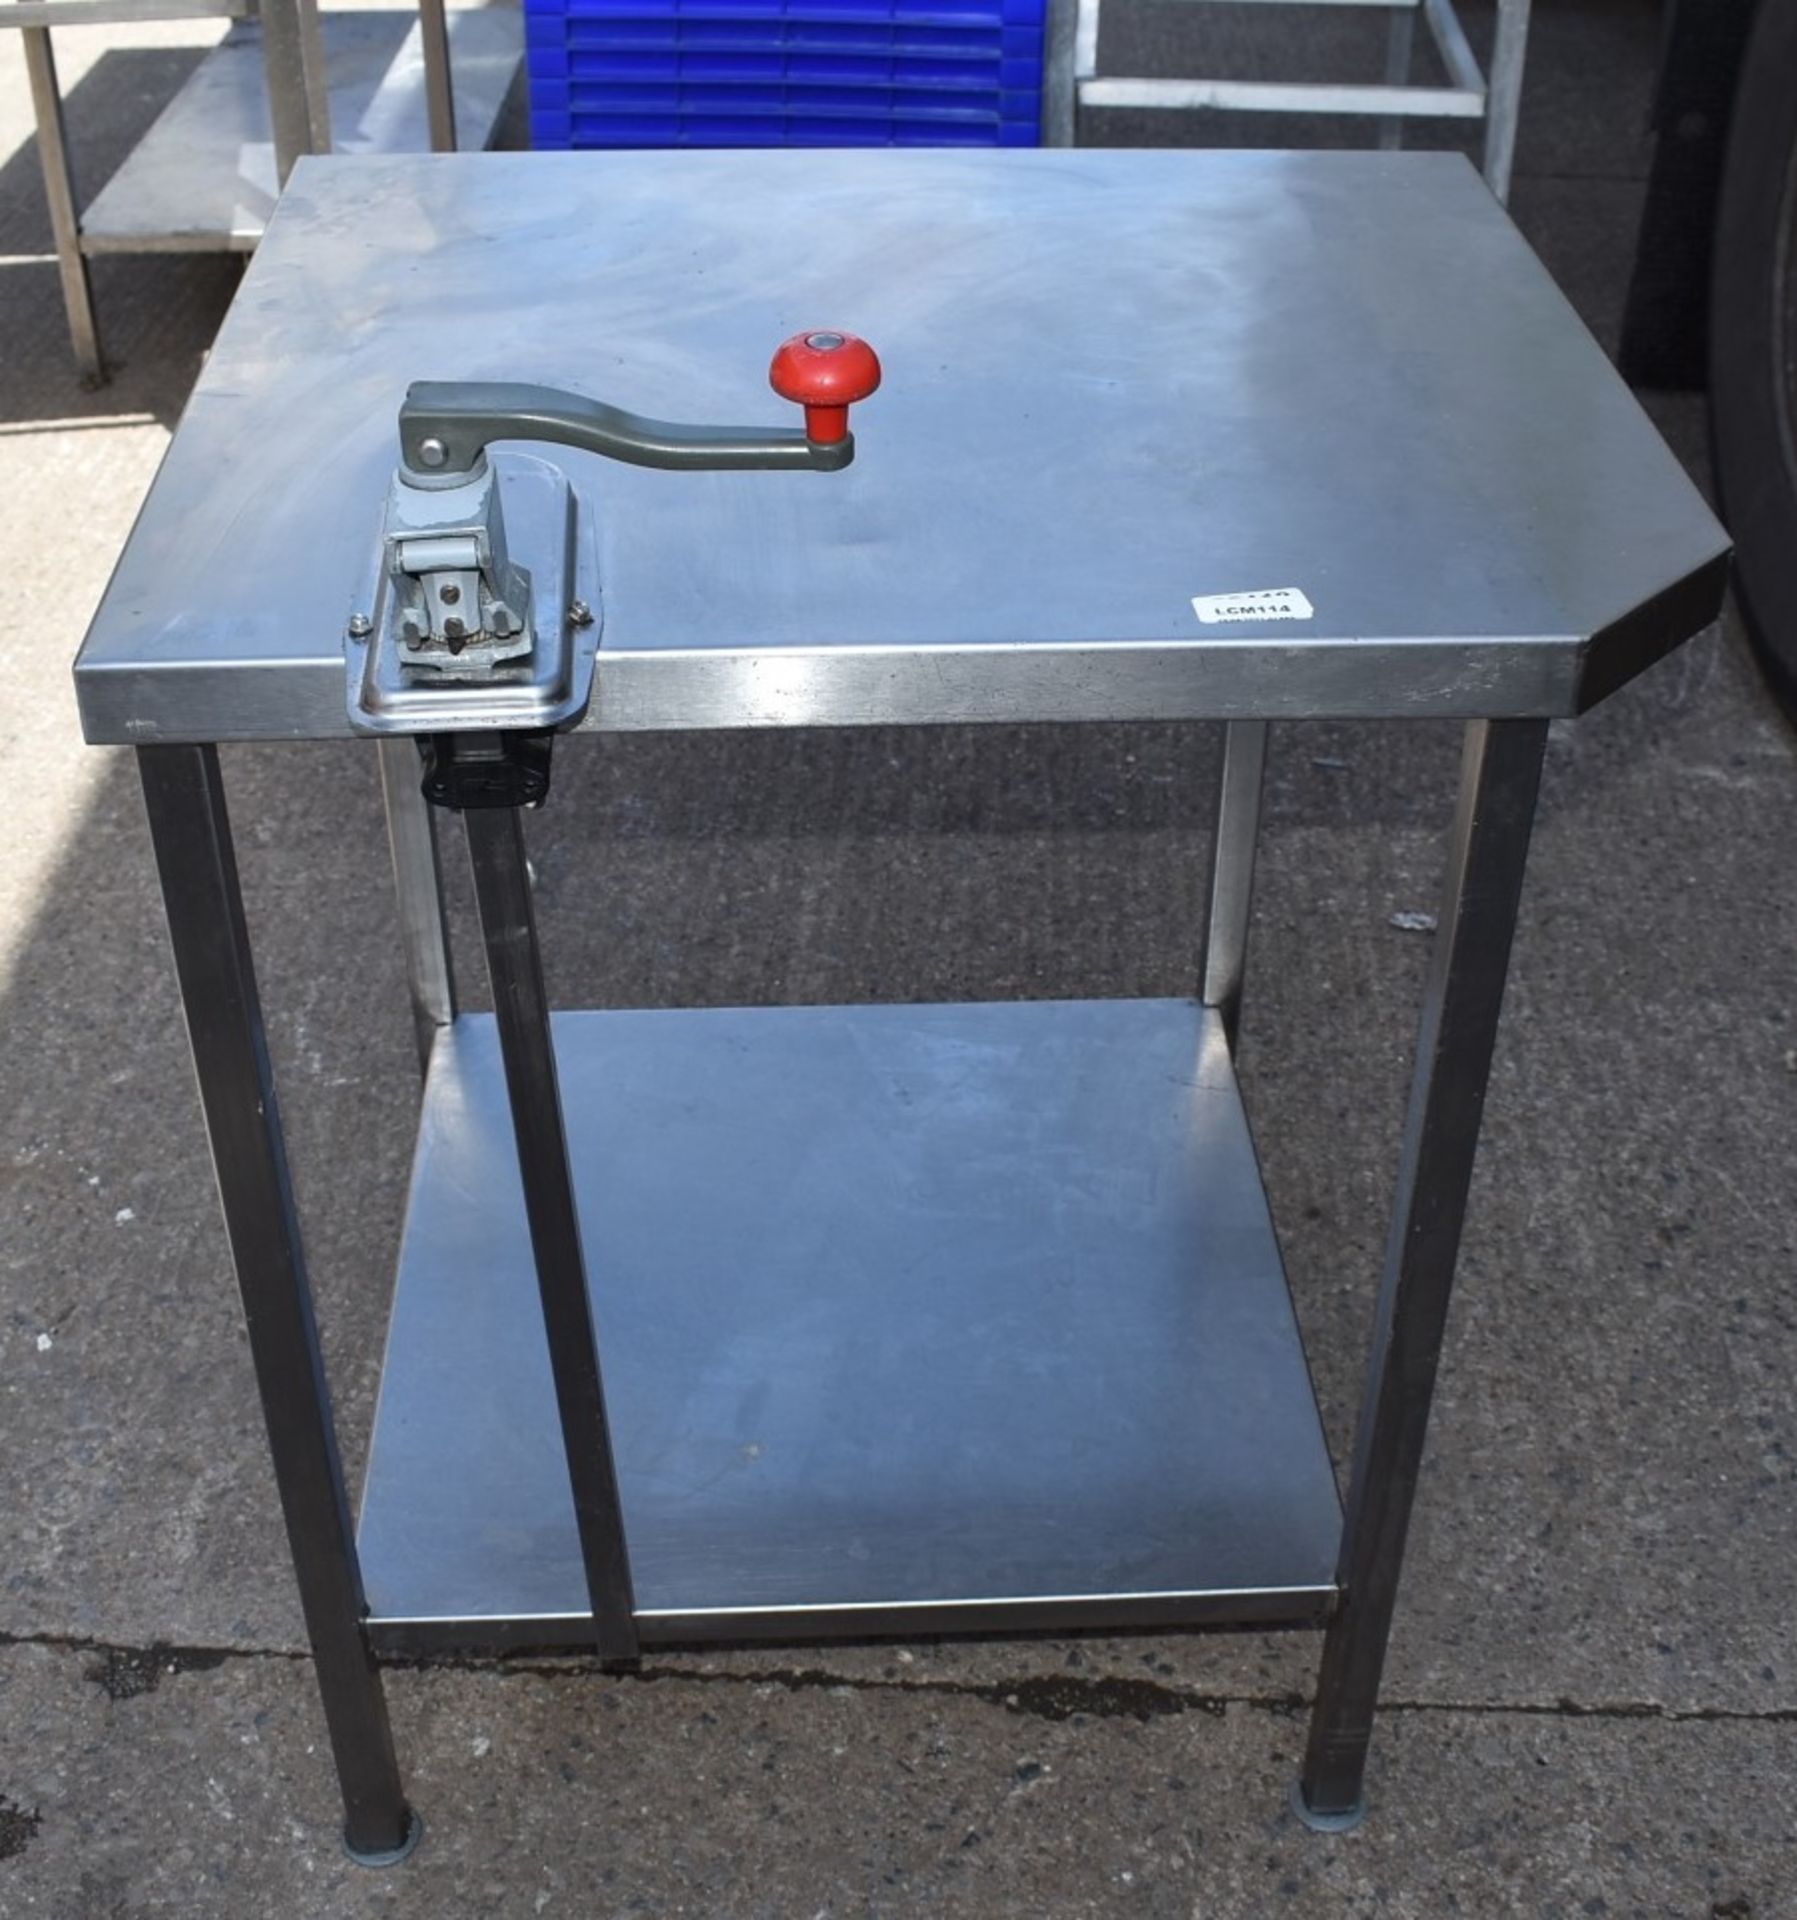 1 x Stainless Steel Prep Table With Commercial Can Opener and Undershelf - Dimensions: H86 x W75 x